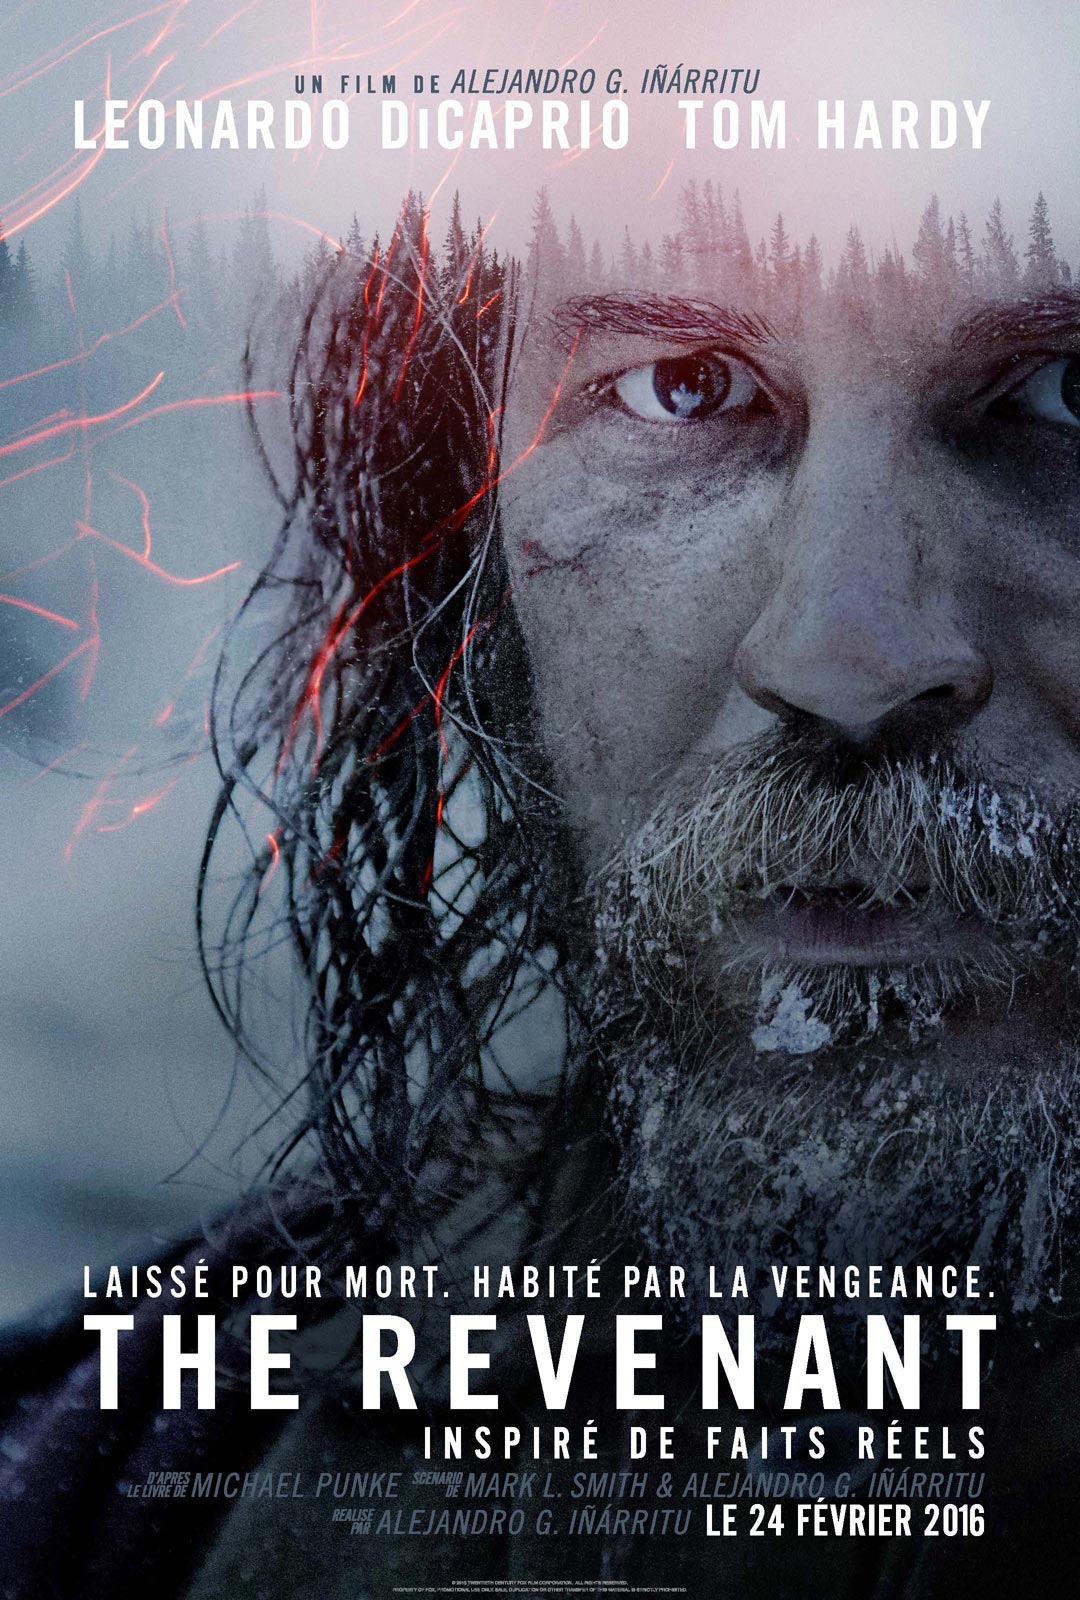 the revenant streaming free hd